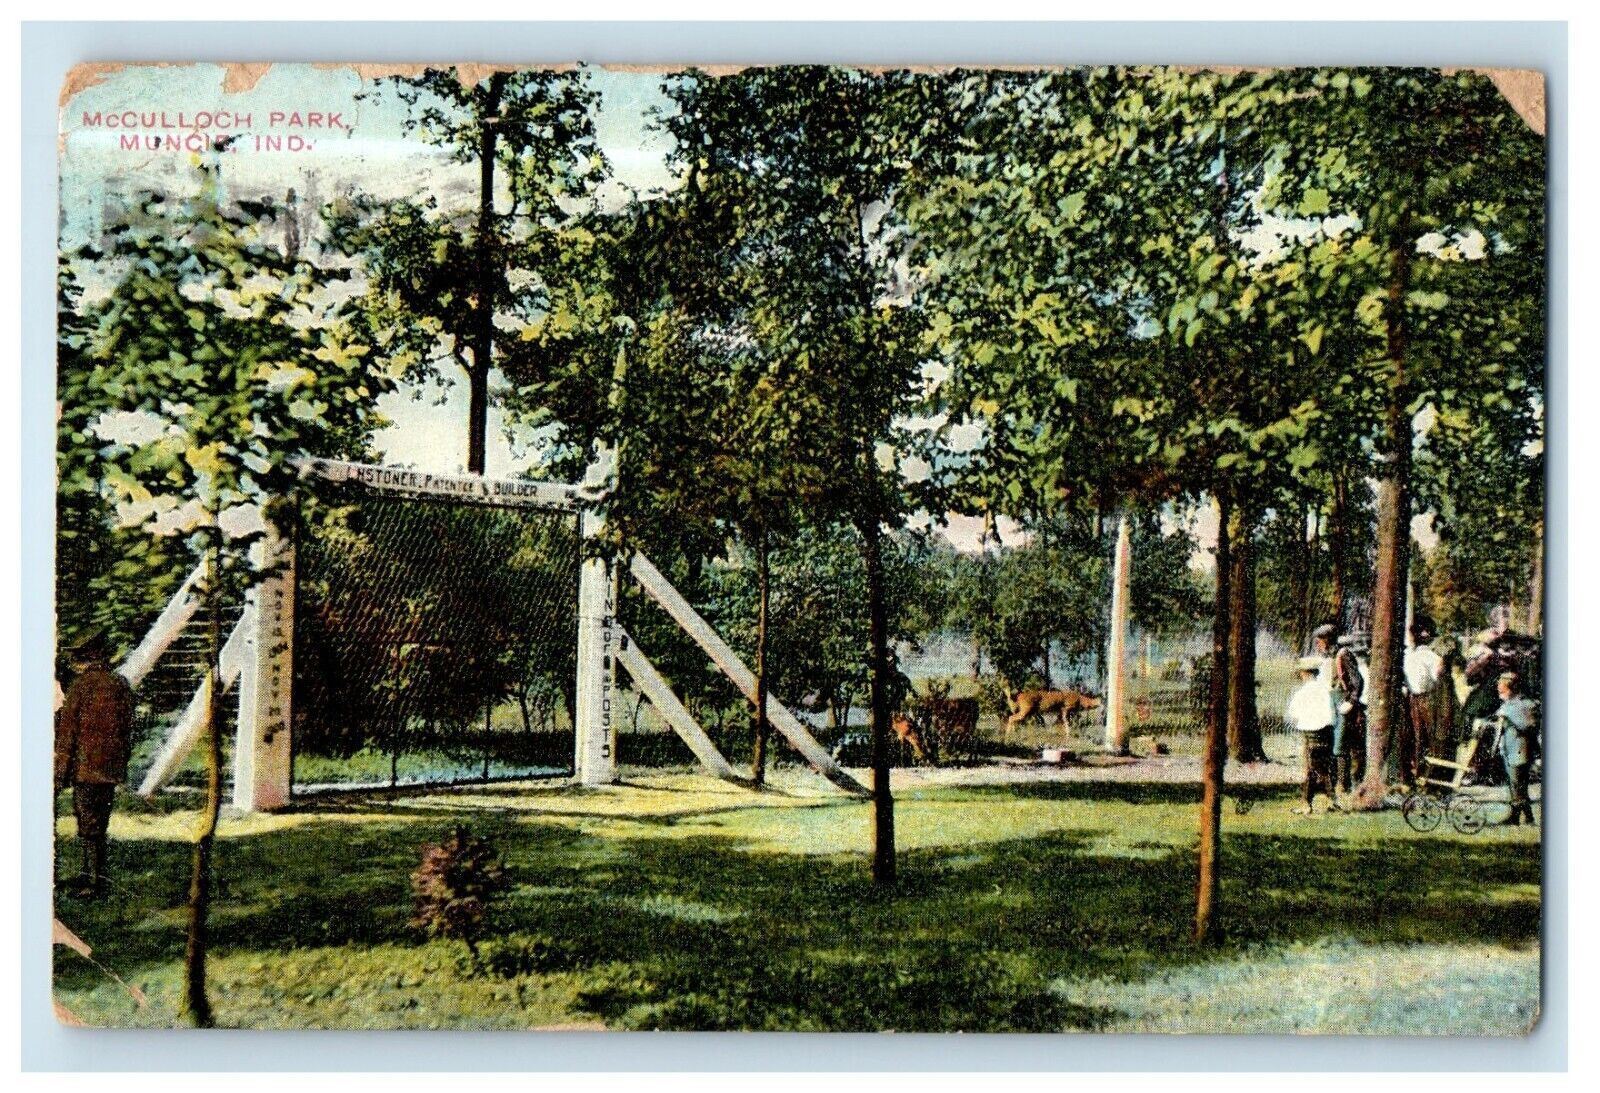 1909 A View Of McCulloch Park Muncie Indiana IN Posted Antique Postcard